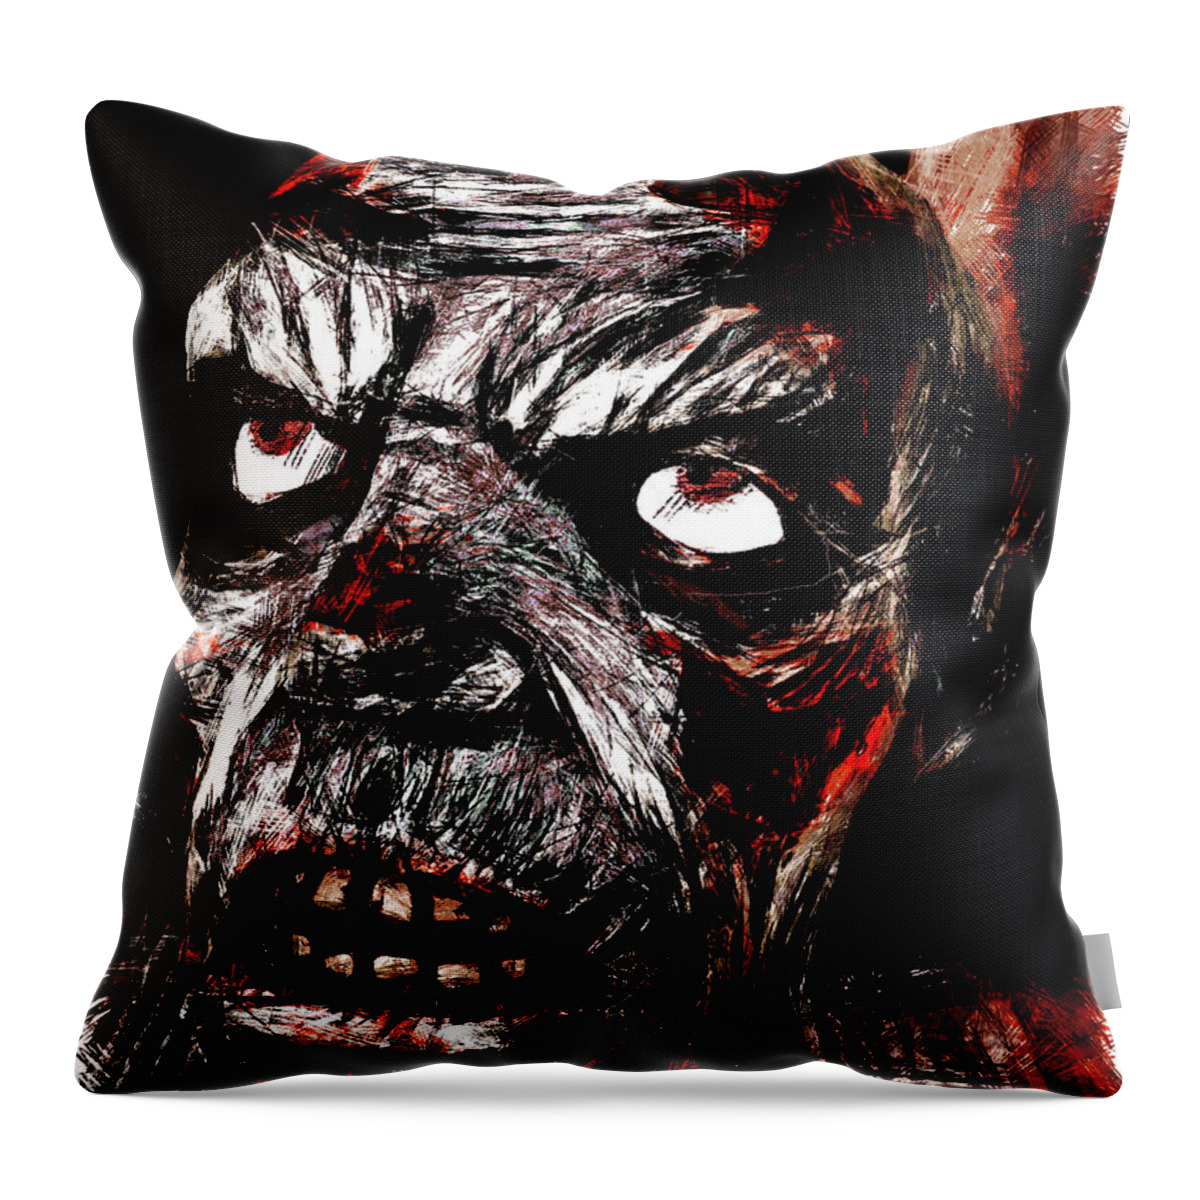 Zombie Throw Pillow featuring the digital art Have You Met My Brother? by Steve Taylor